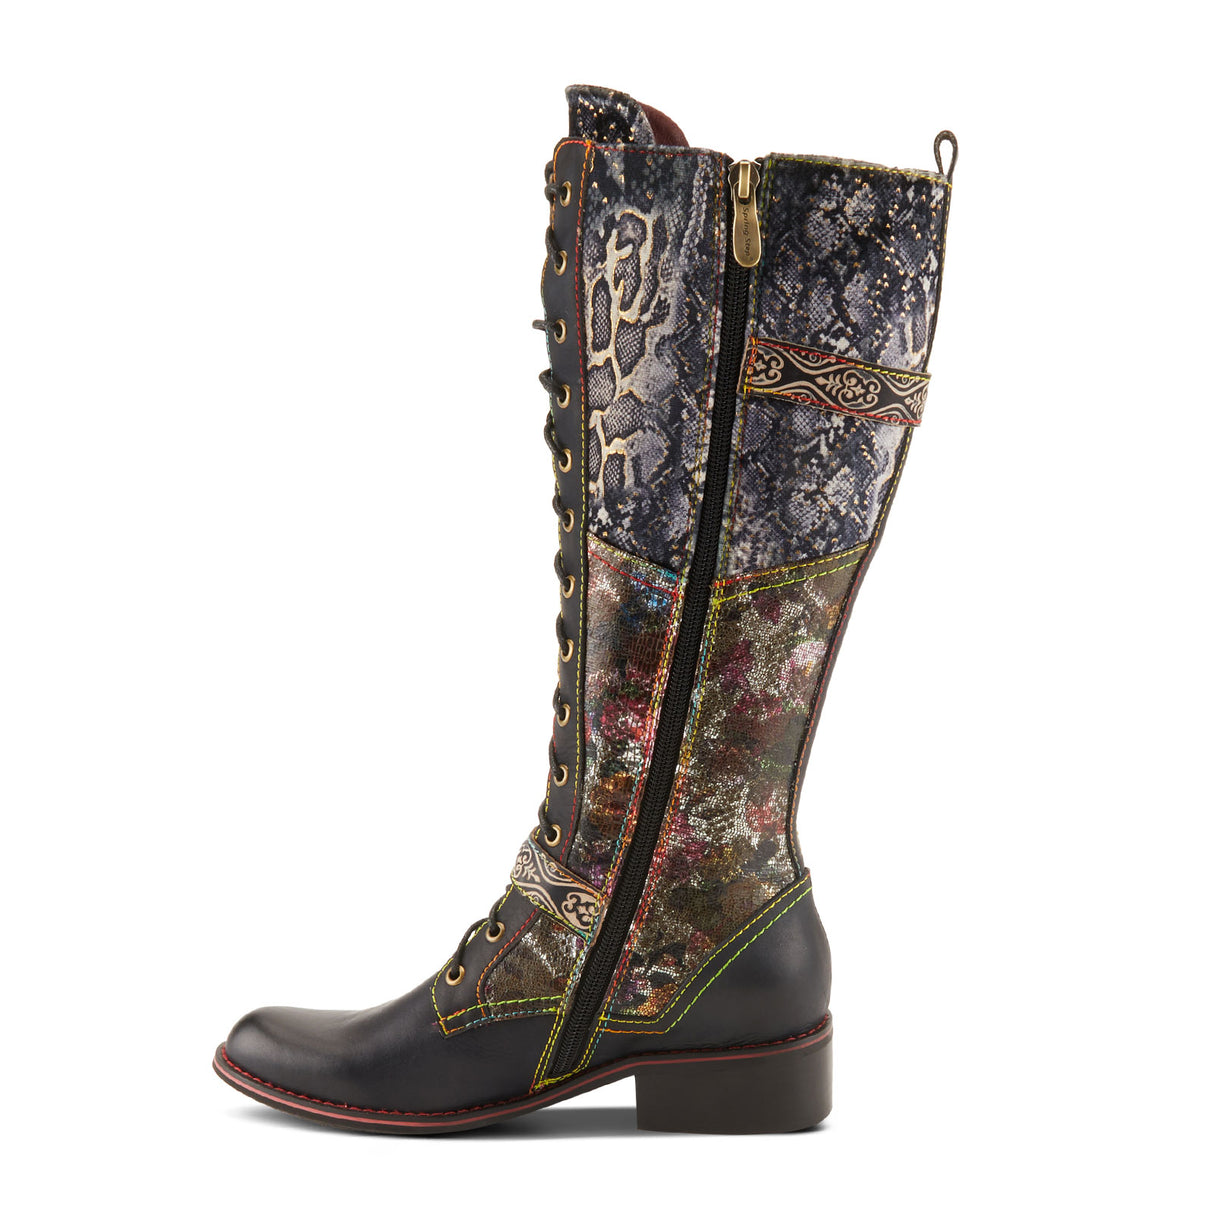 L'Artiste Vaneyck Tall Boot (Women) - Black Multi Boots - Fashion - High - The Heel Shoe Fitters